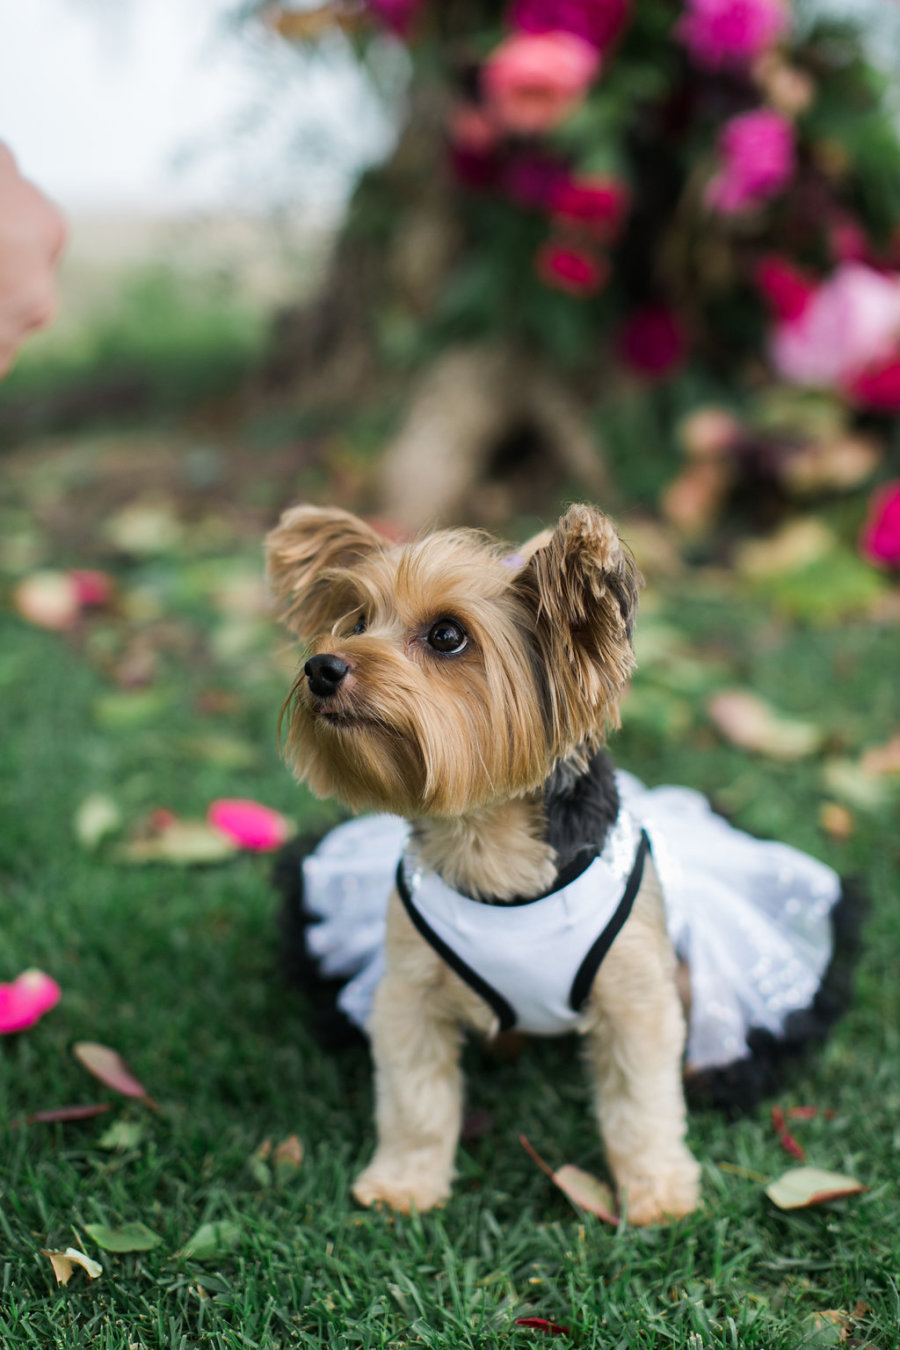 The couple's dog was dressed up in a tutu for a formal look